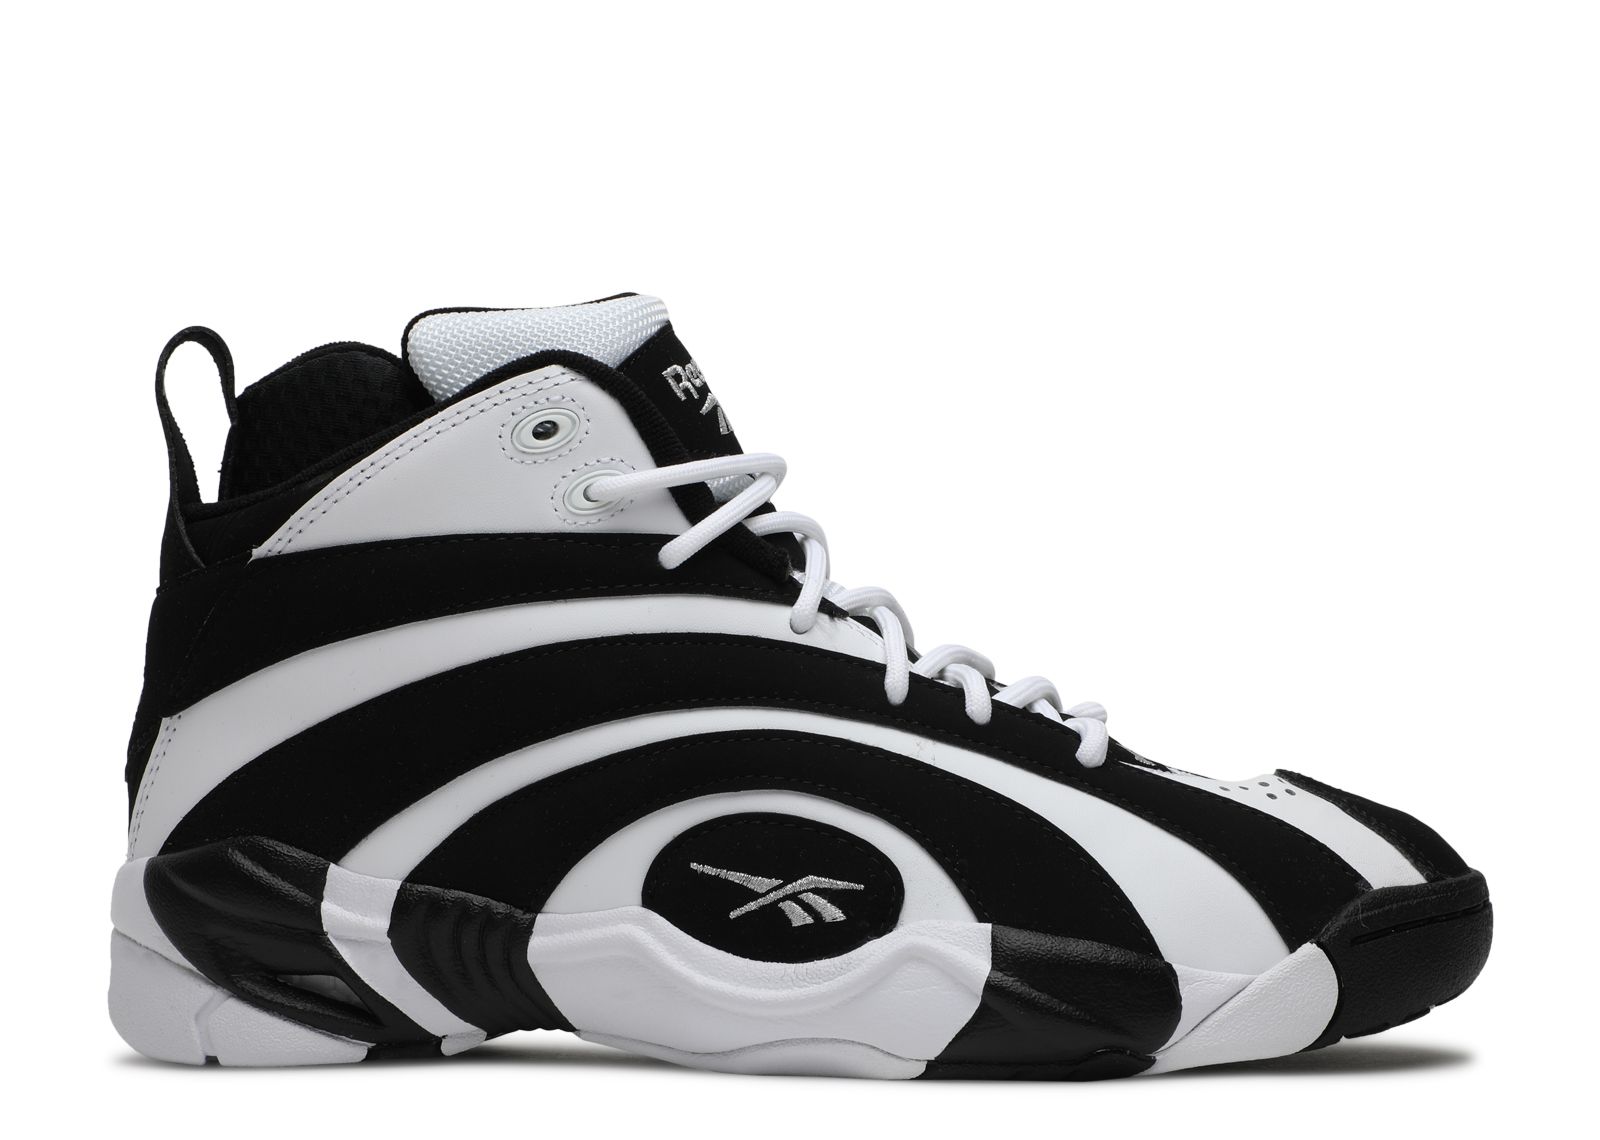 The Eerie Story Behind Shaquille O'Neal's Reebok Shoes - Sports